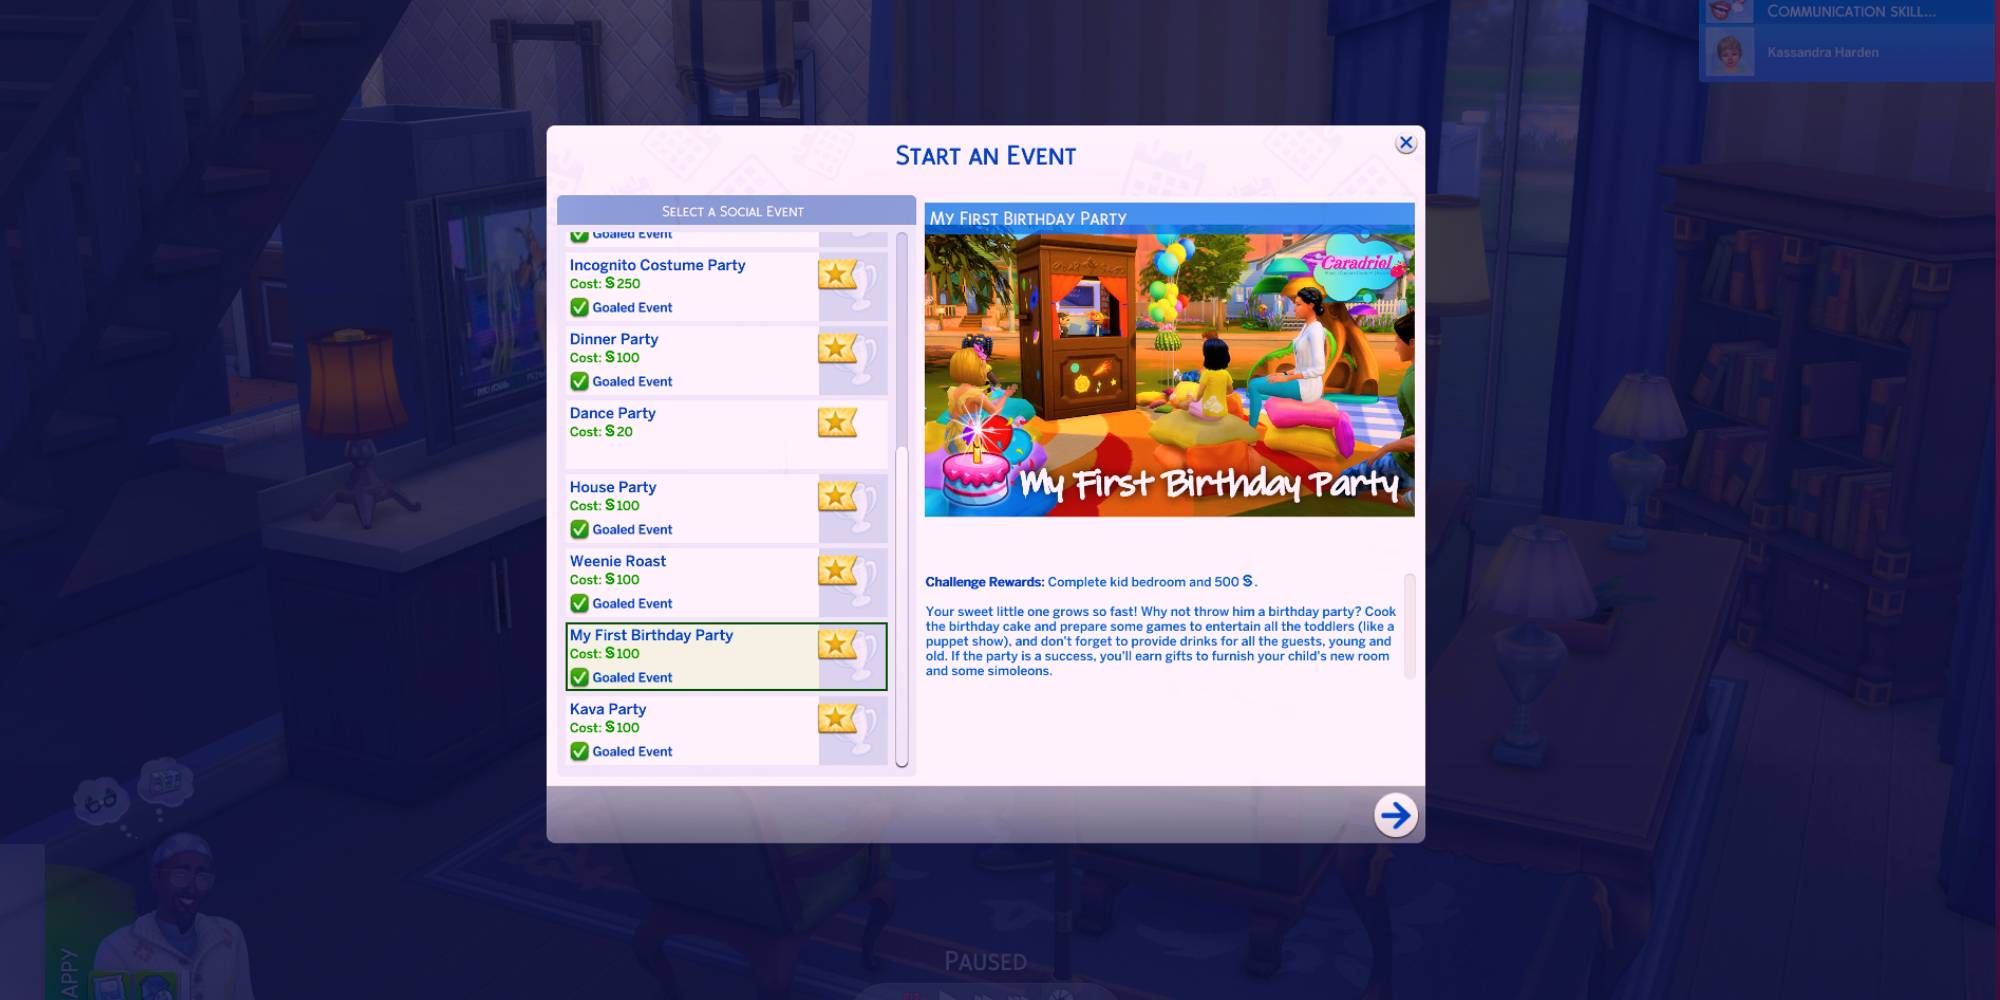 A screenshot showing the in-game menu for planning the My First Birthday Party event